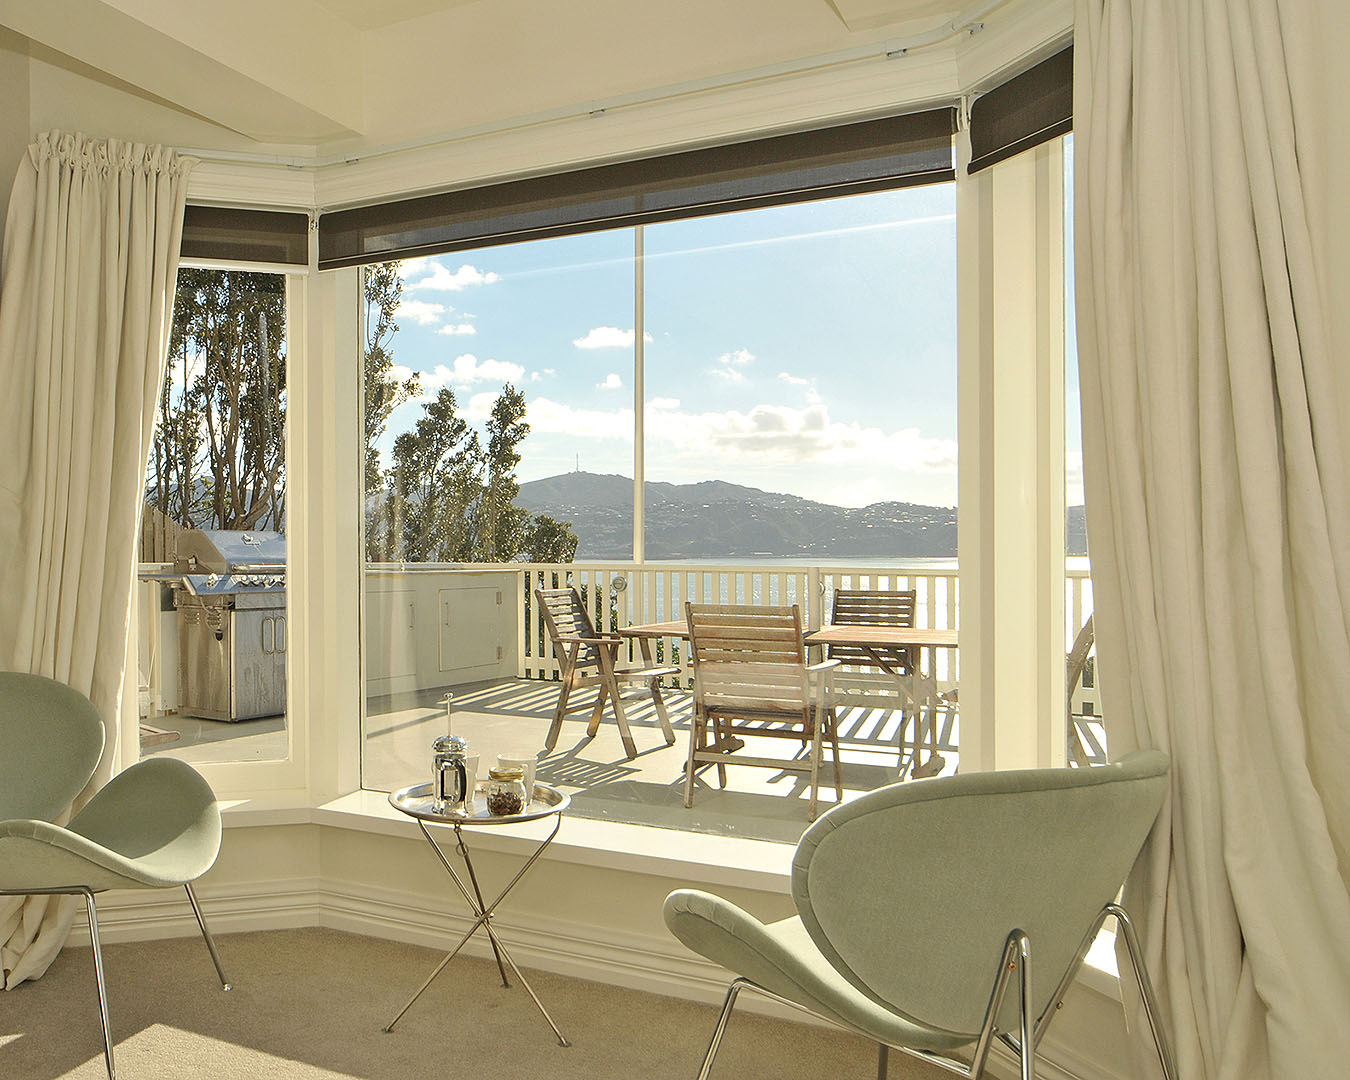 The expansive balcony at Crescent Studio boasts an outdoor dining set up and sweeping ocean views.